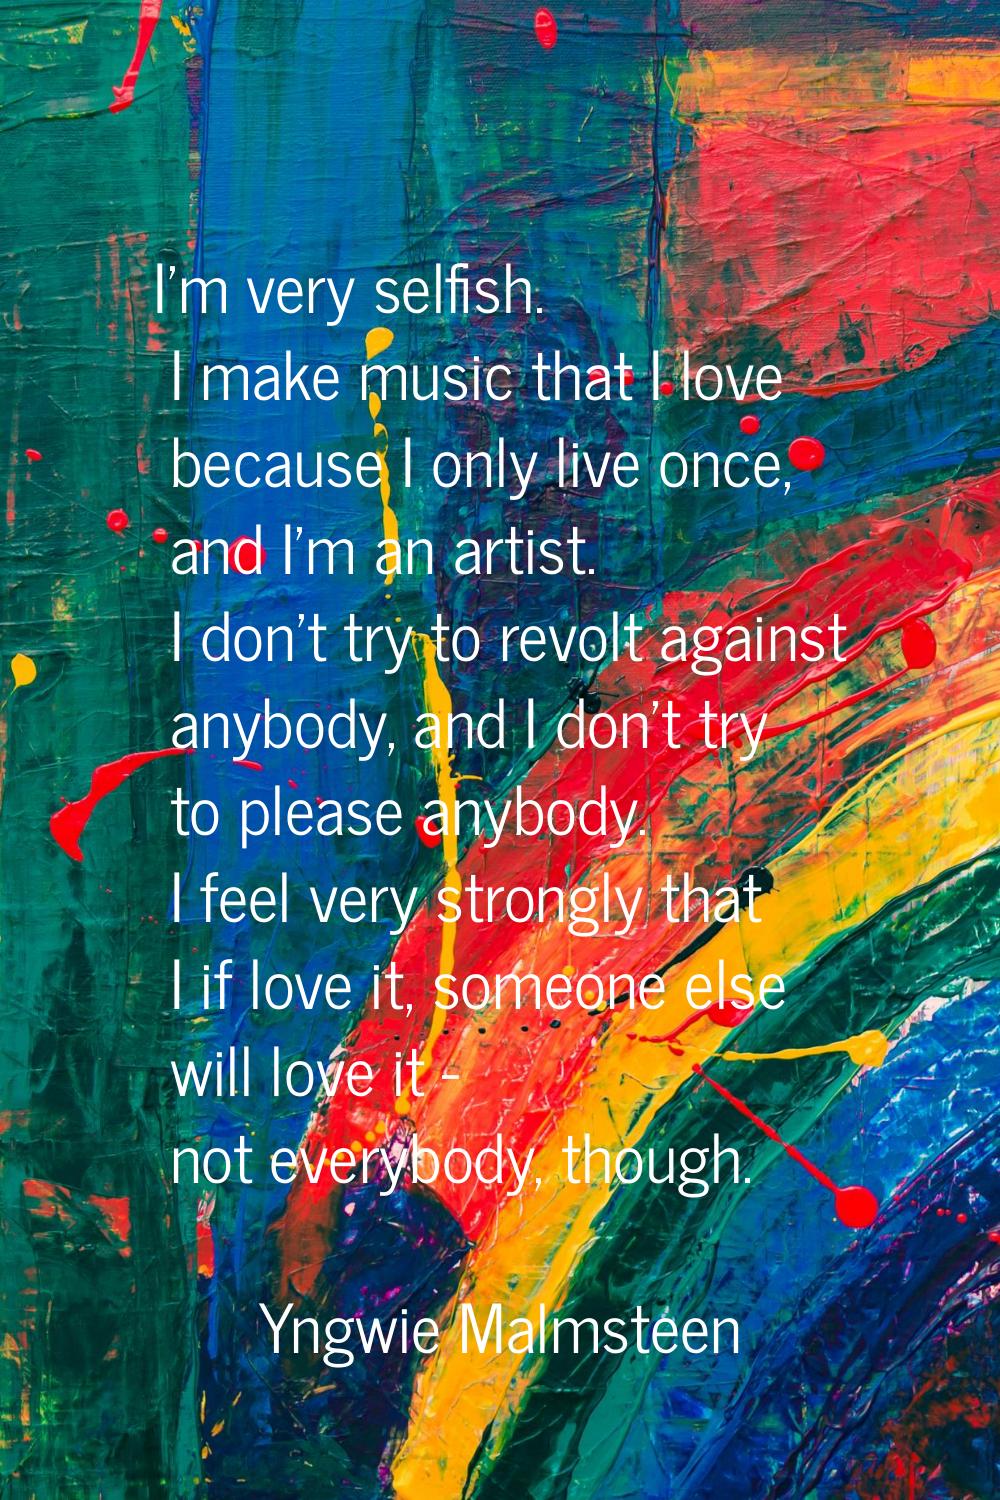 I'm very selfish. I make music that I love because I only live once, and I'm an artist. I don't try